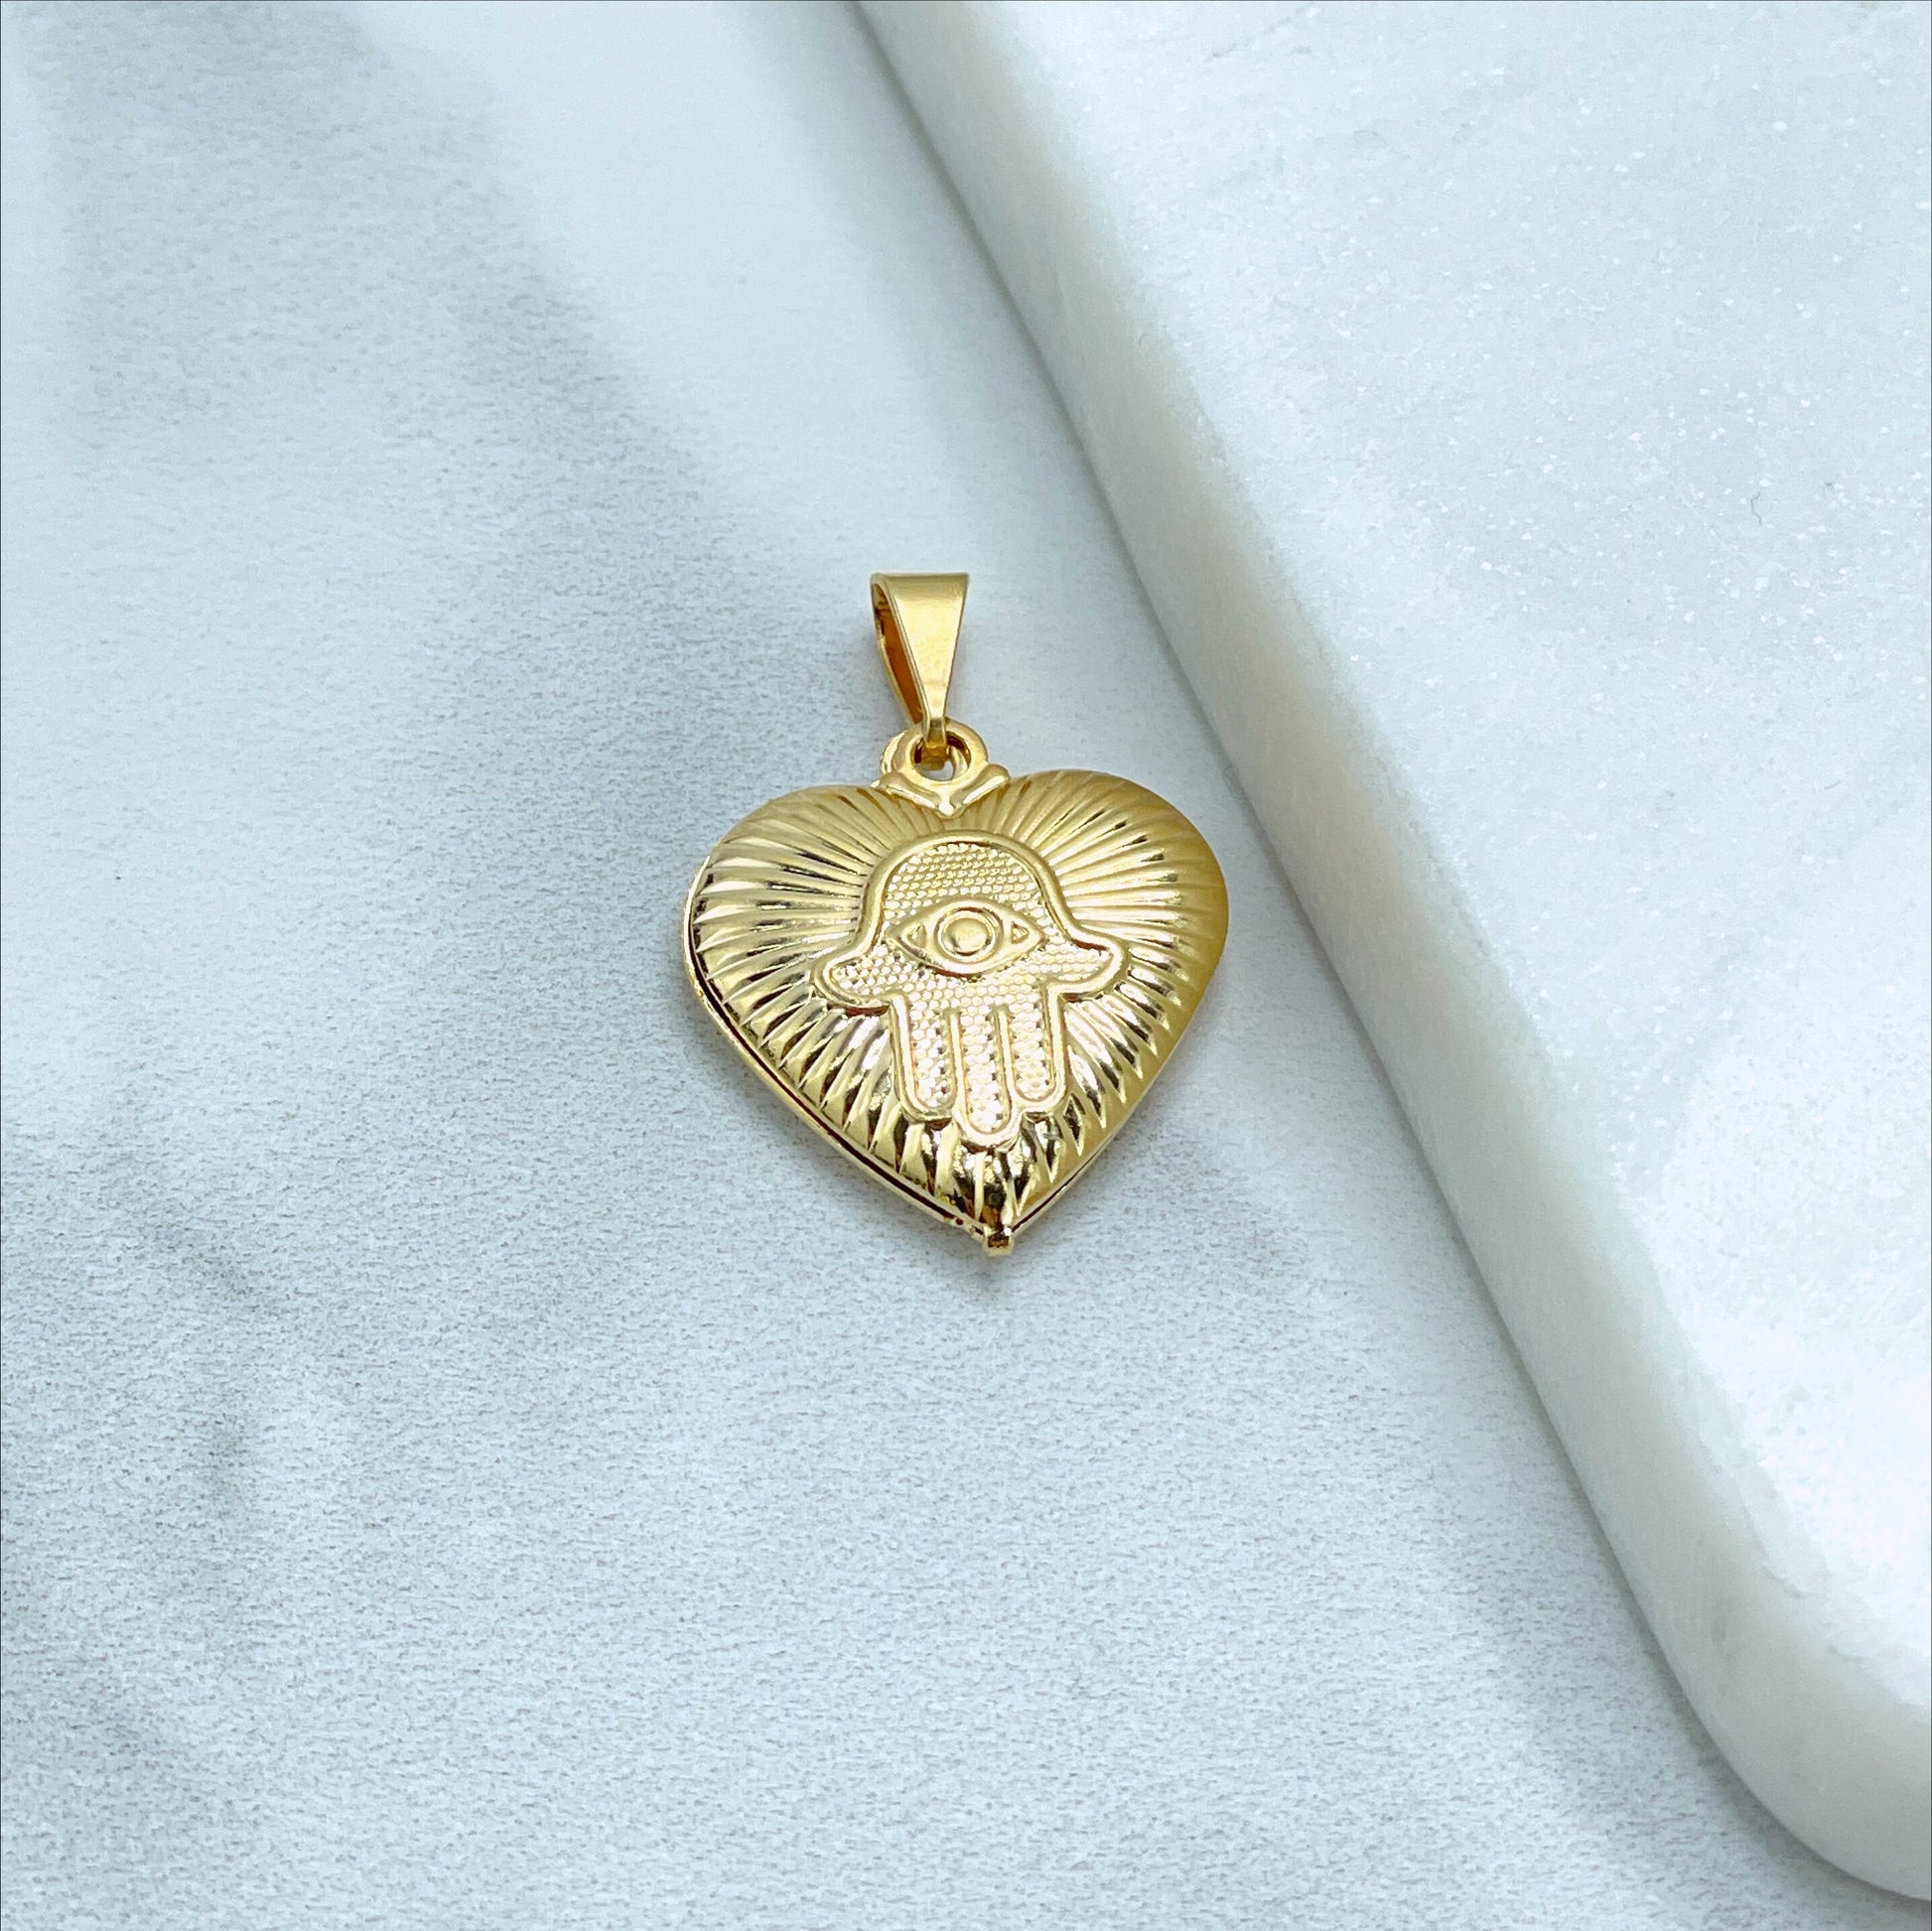 18k Gold Filled Lucky Hamsa Hand, heart Shape Charm Pendant Wholesale Jewelry Making Supplies